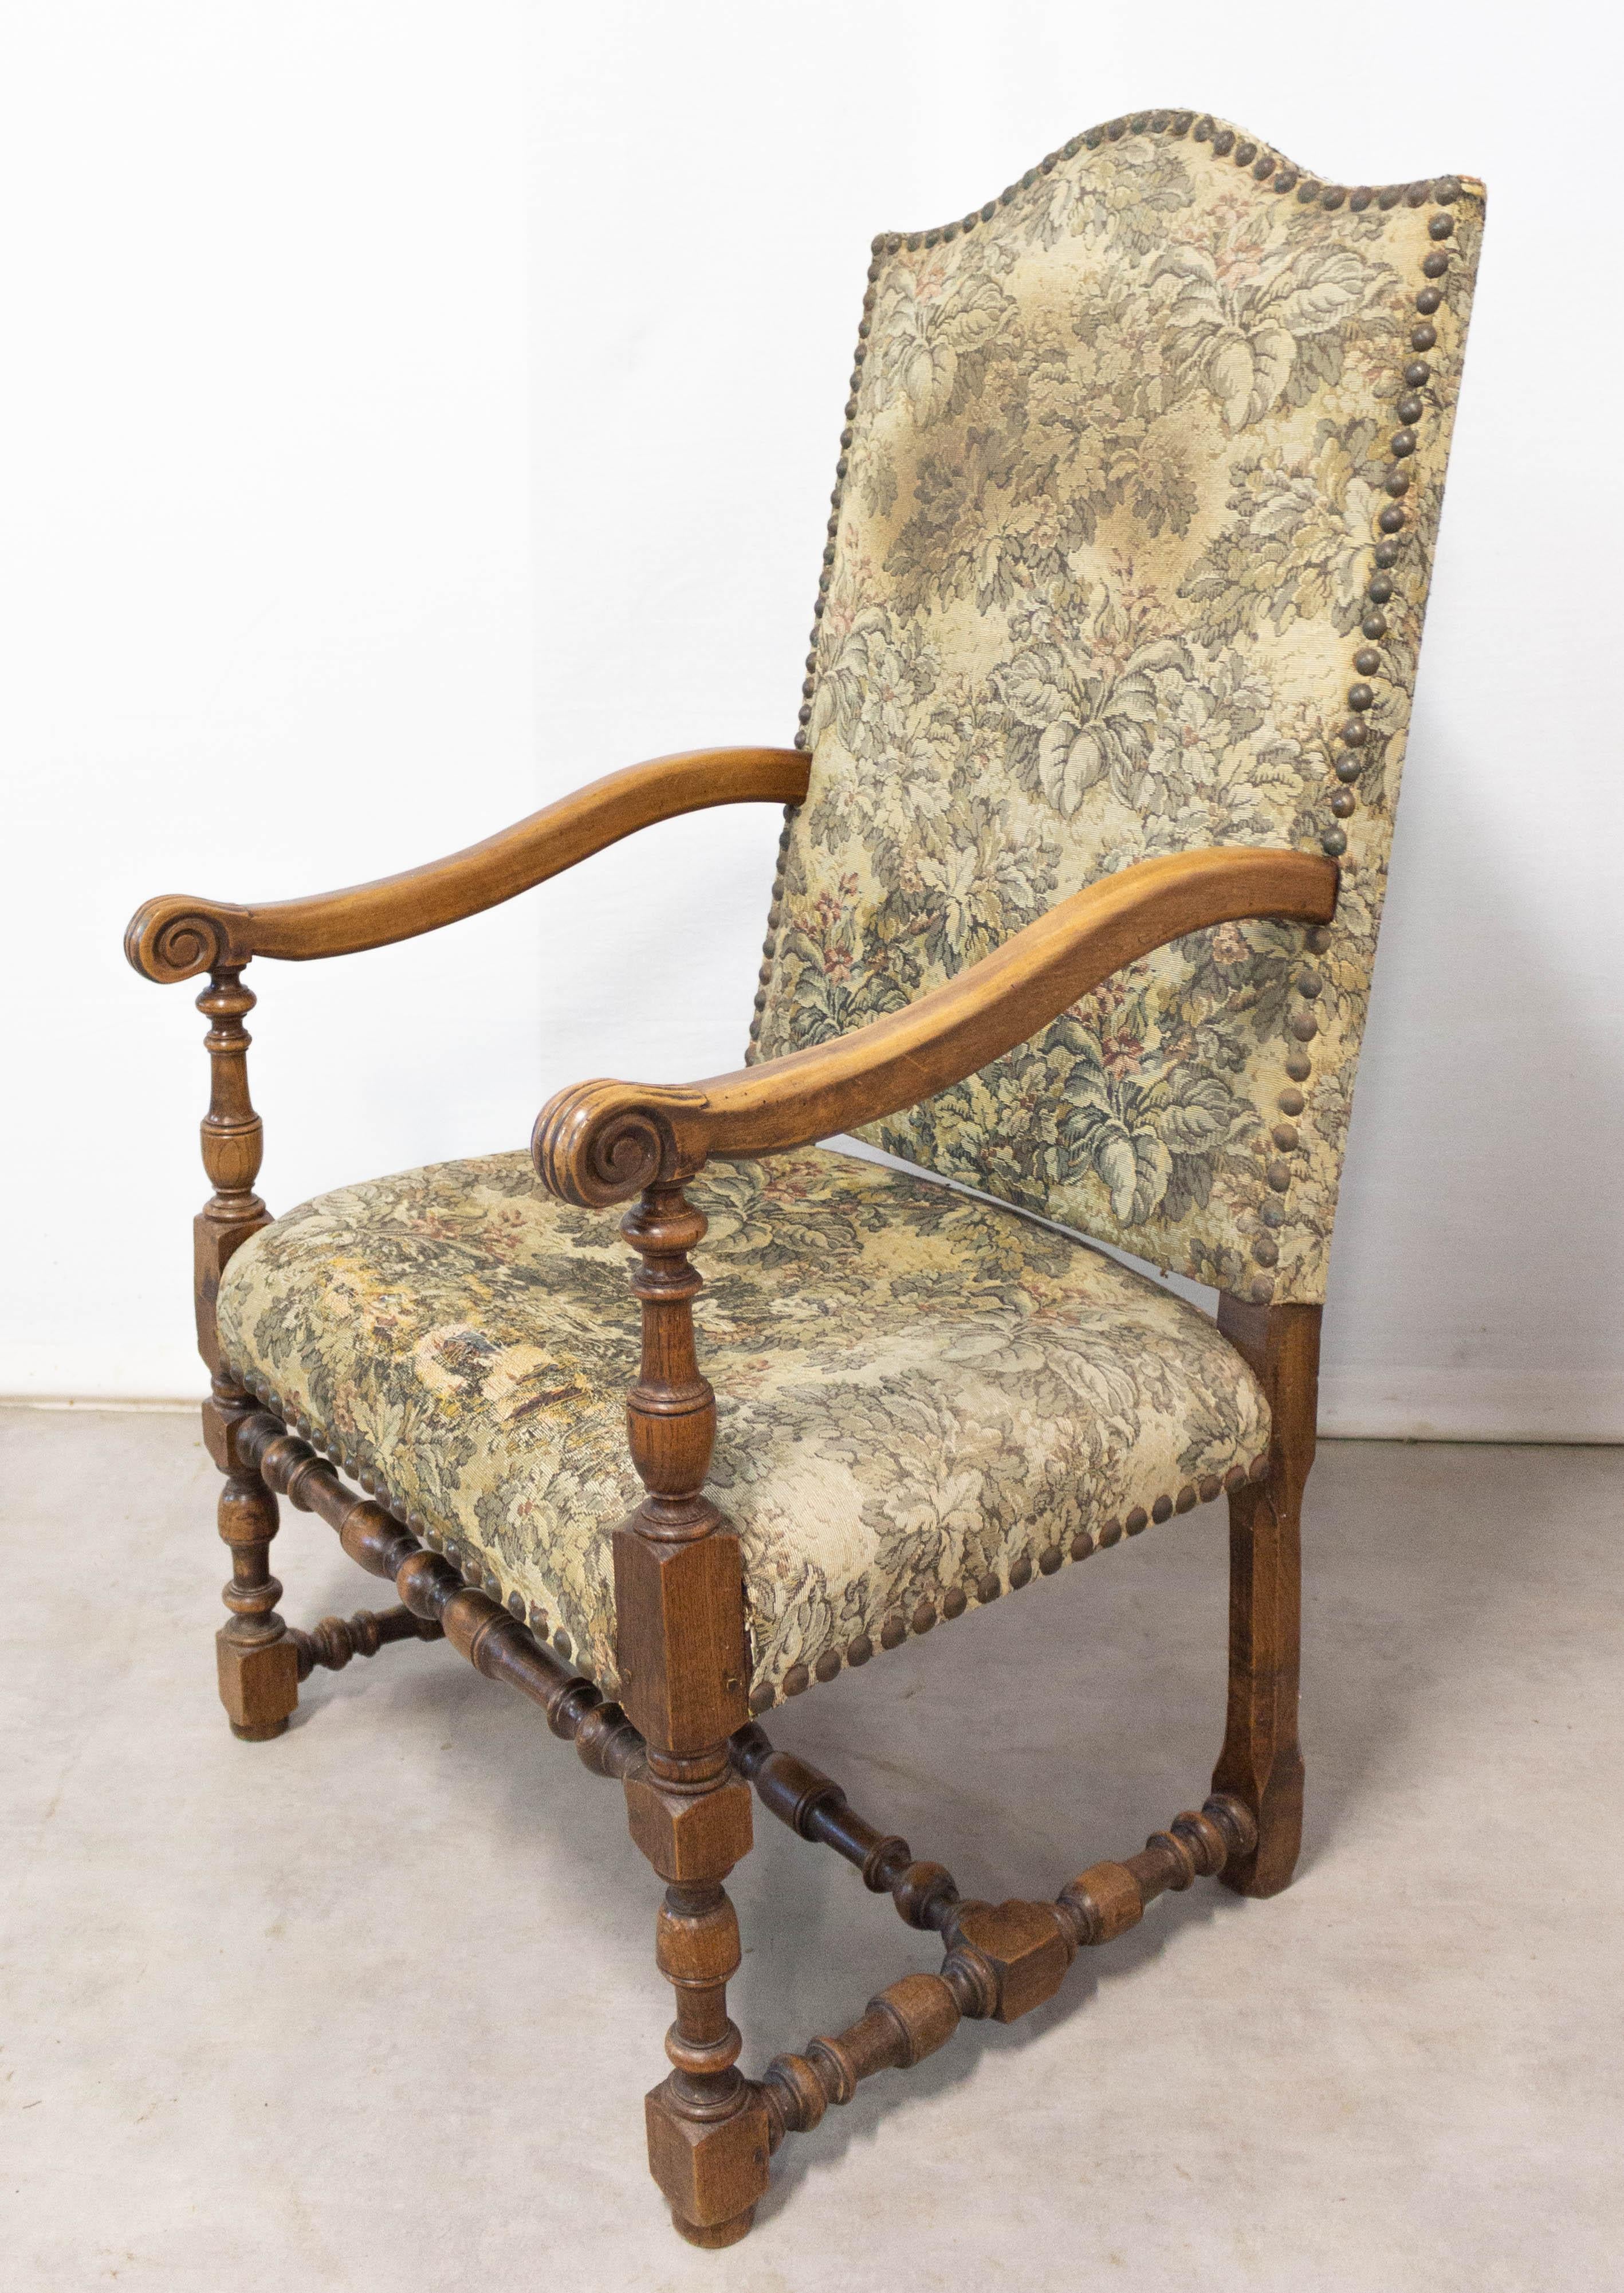 Pair of Louis XIV Revival Armchairs French, Midcentury to Be Re-Upholstered 1